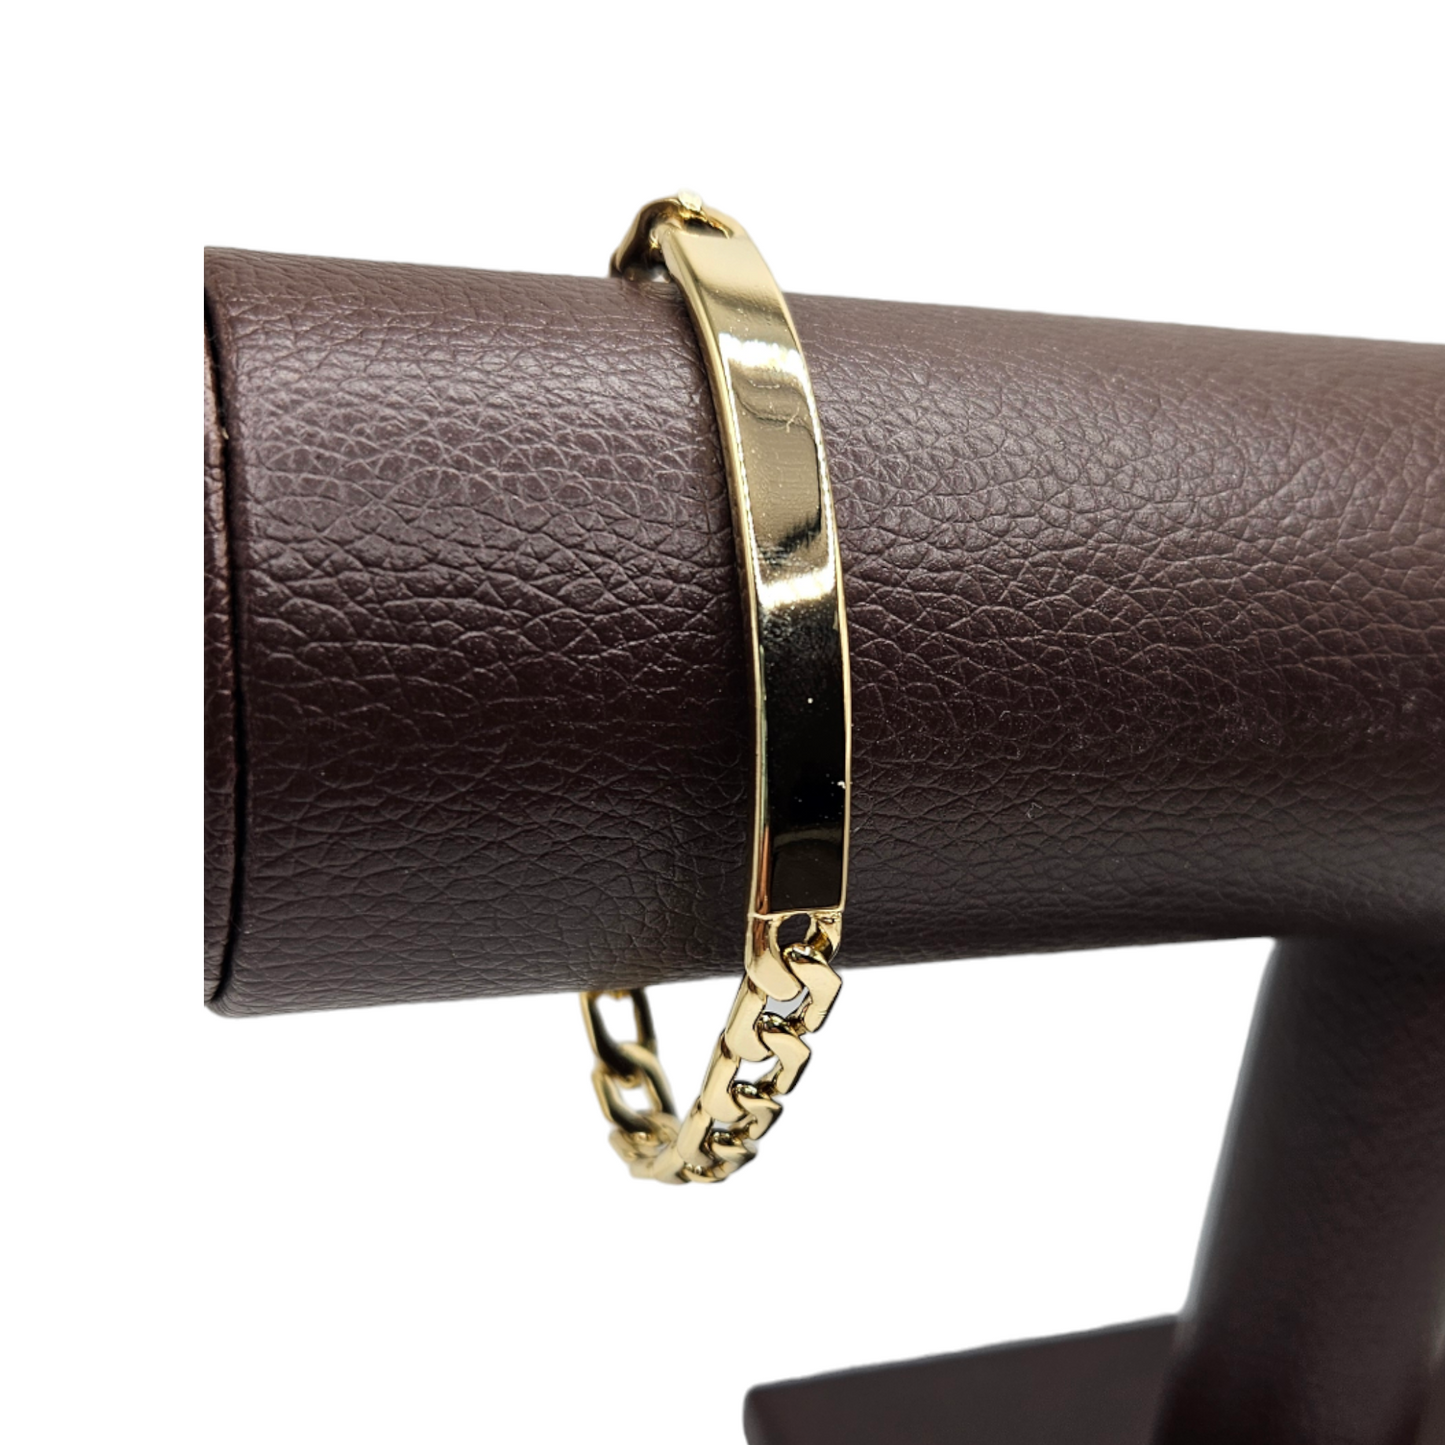 ID Plate Bracelet in 14k Gold Plated